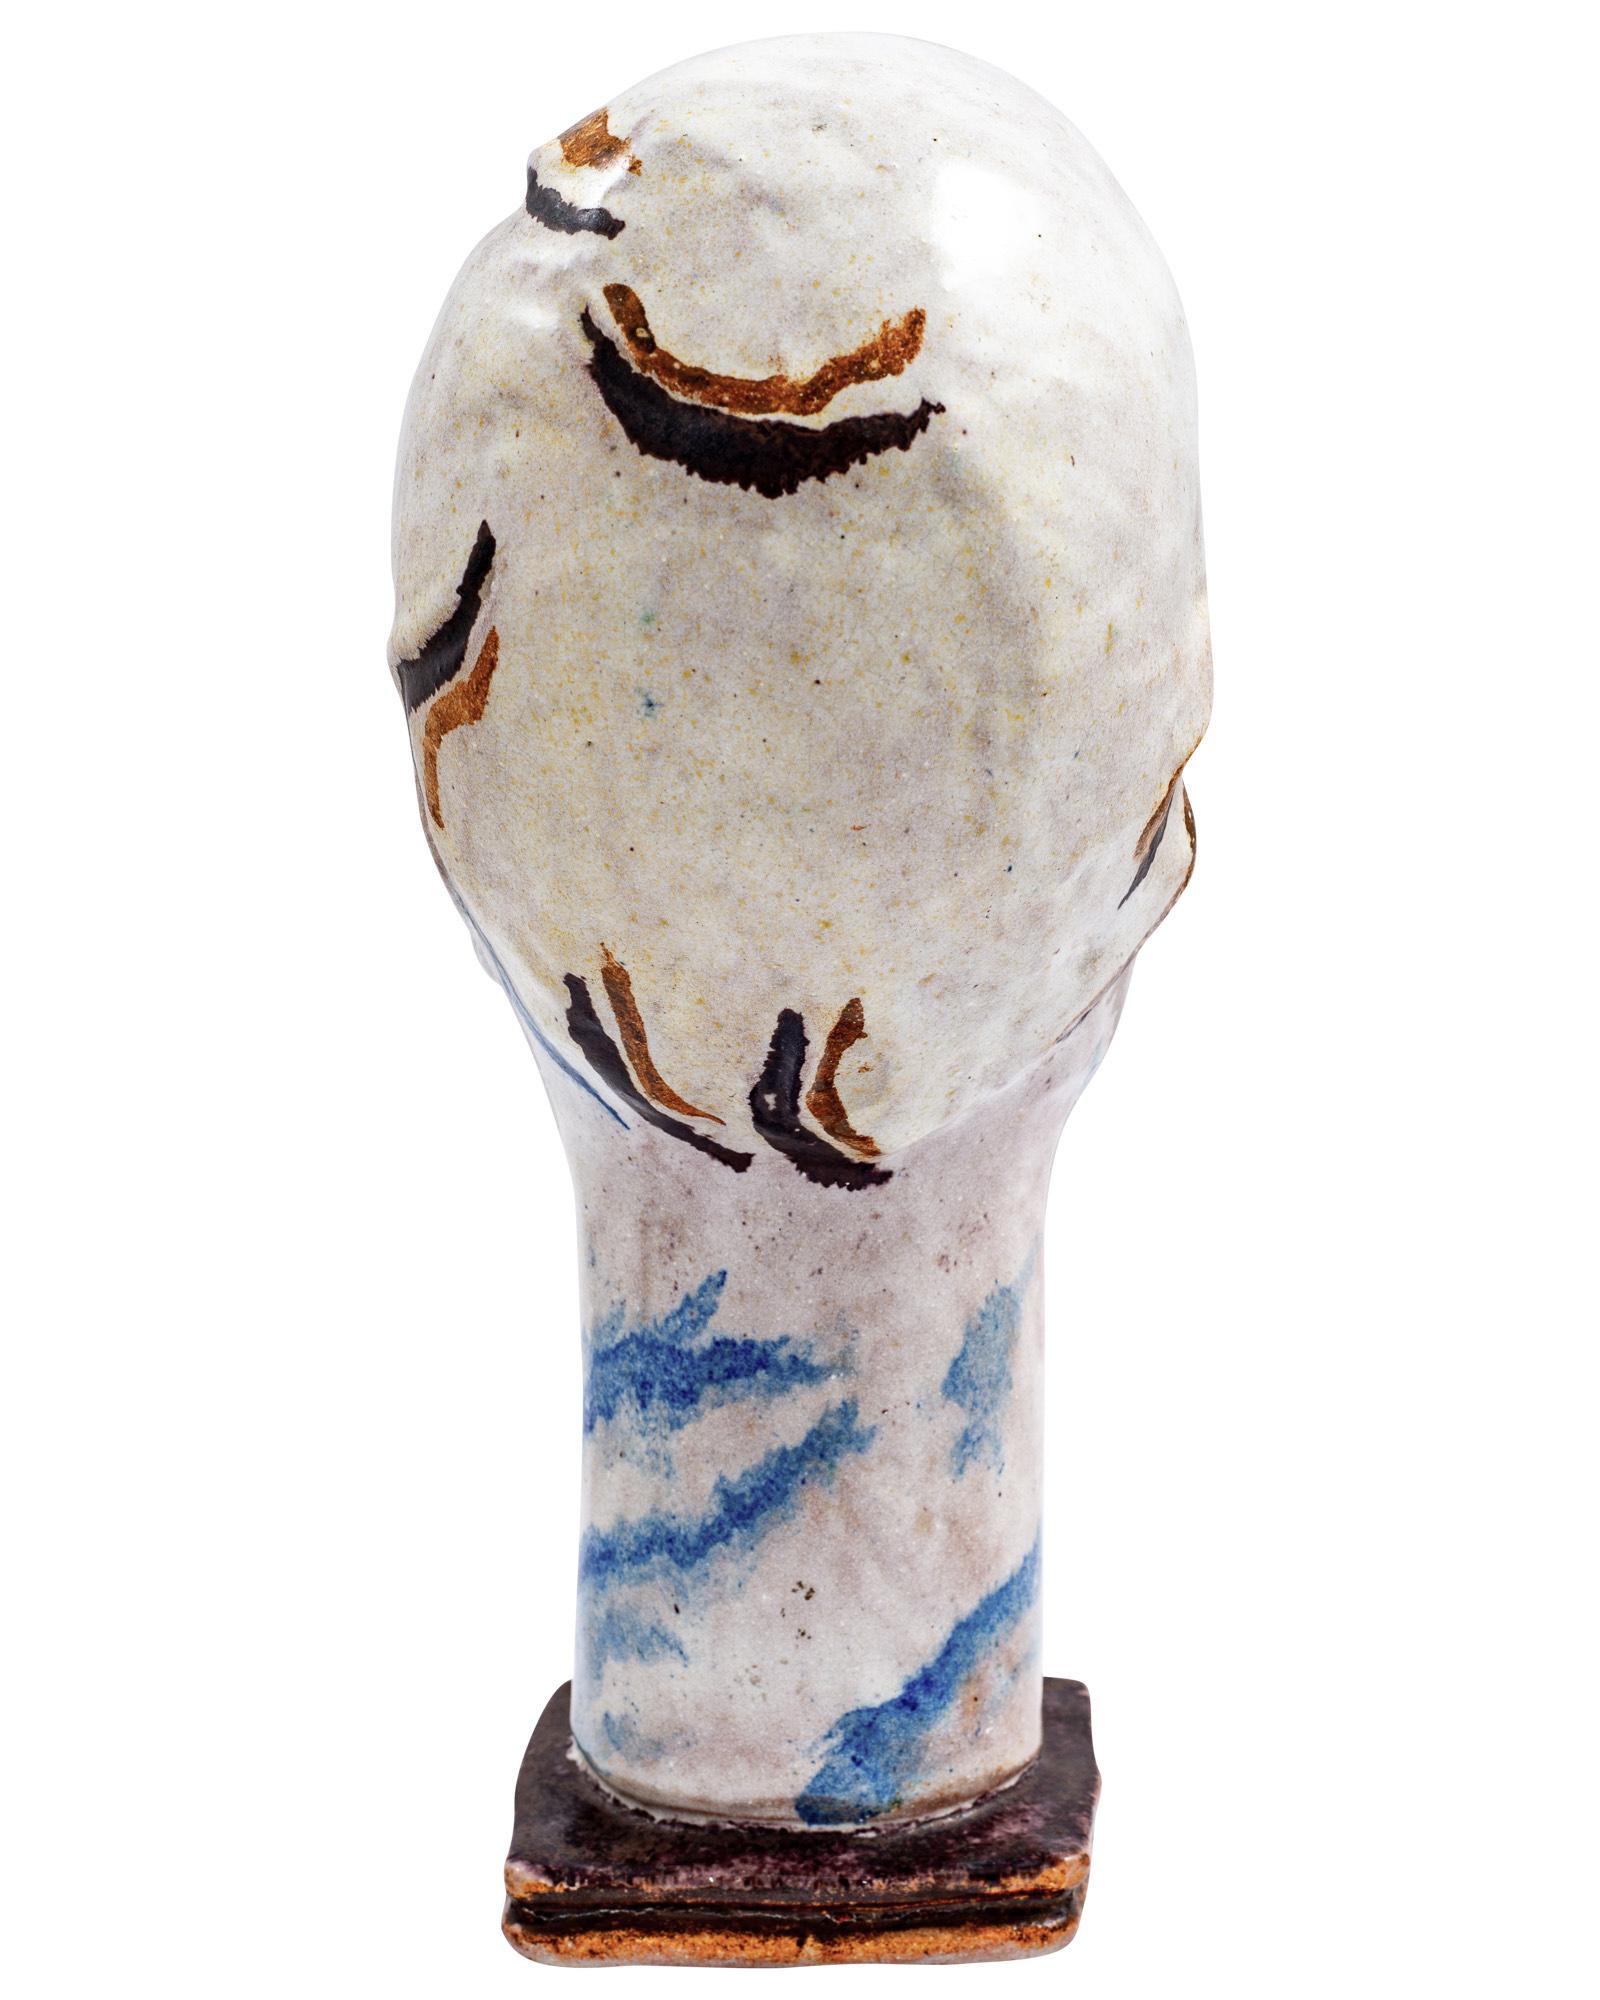 Austrian Art Female Head designed by Gudrun Baudisch executed by Werkstatte Hagenauer Wien circa 1928 expressive ceramic marked

Gudrun Baudisch (1907-1982) was one of the innovative artists who had a decisive influence on the ceramic works of the